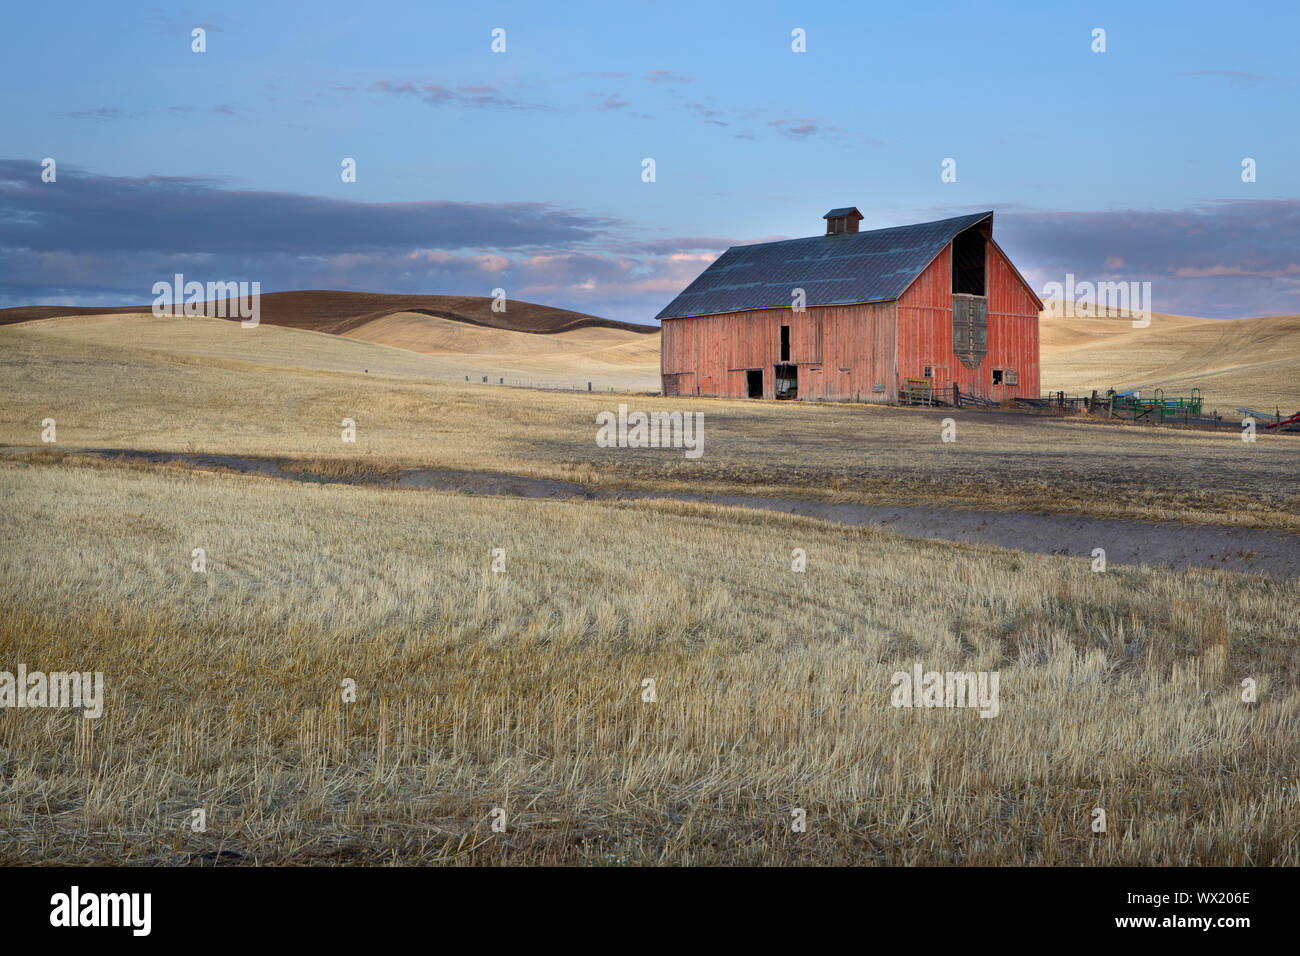 A red barn stands in the harvested wheat field in the Palouse region of eastern Washington. Stock Photo